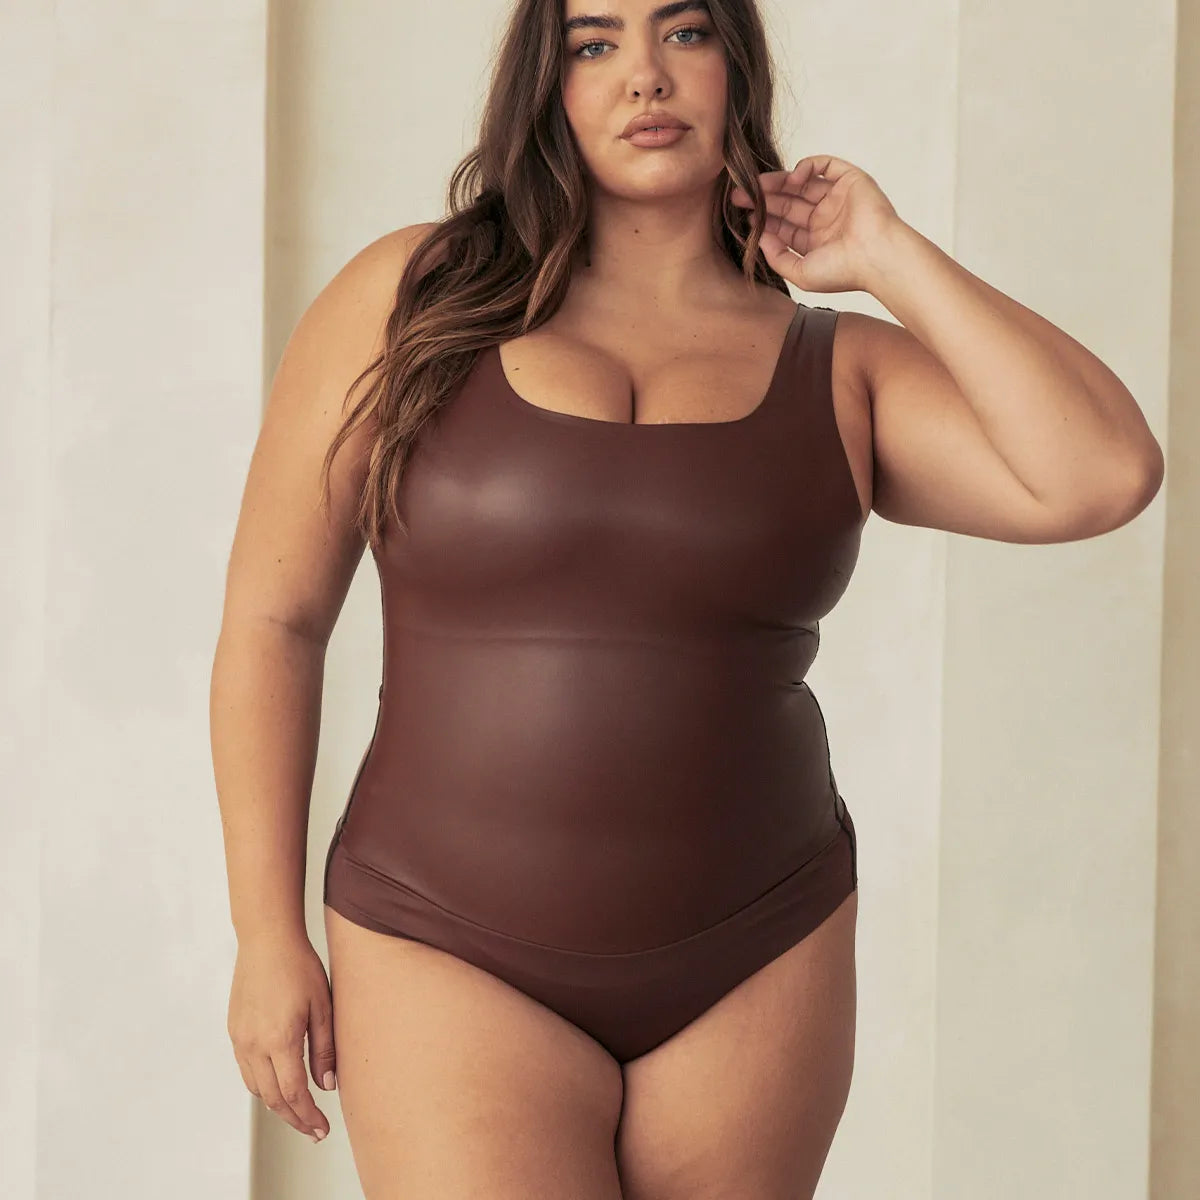 Vegan leather shapewear by @pinsyshapewear 🔥 Curvy girl approved